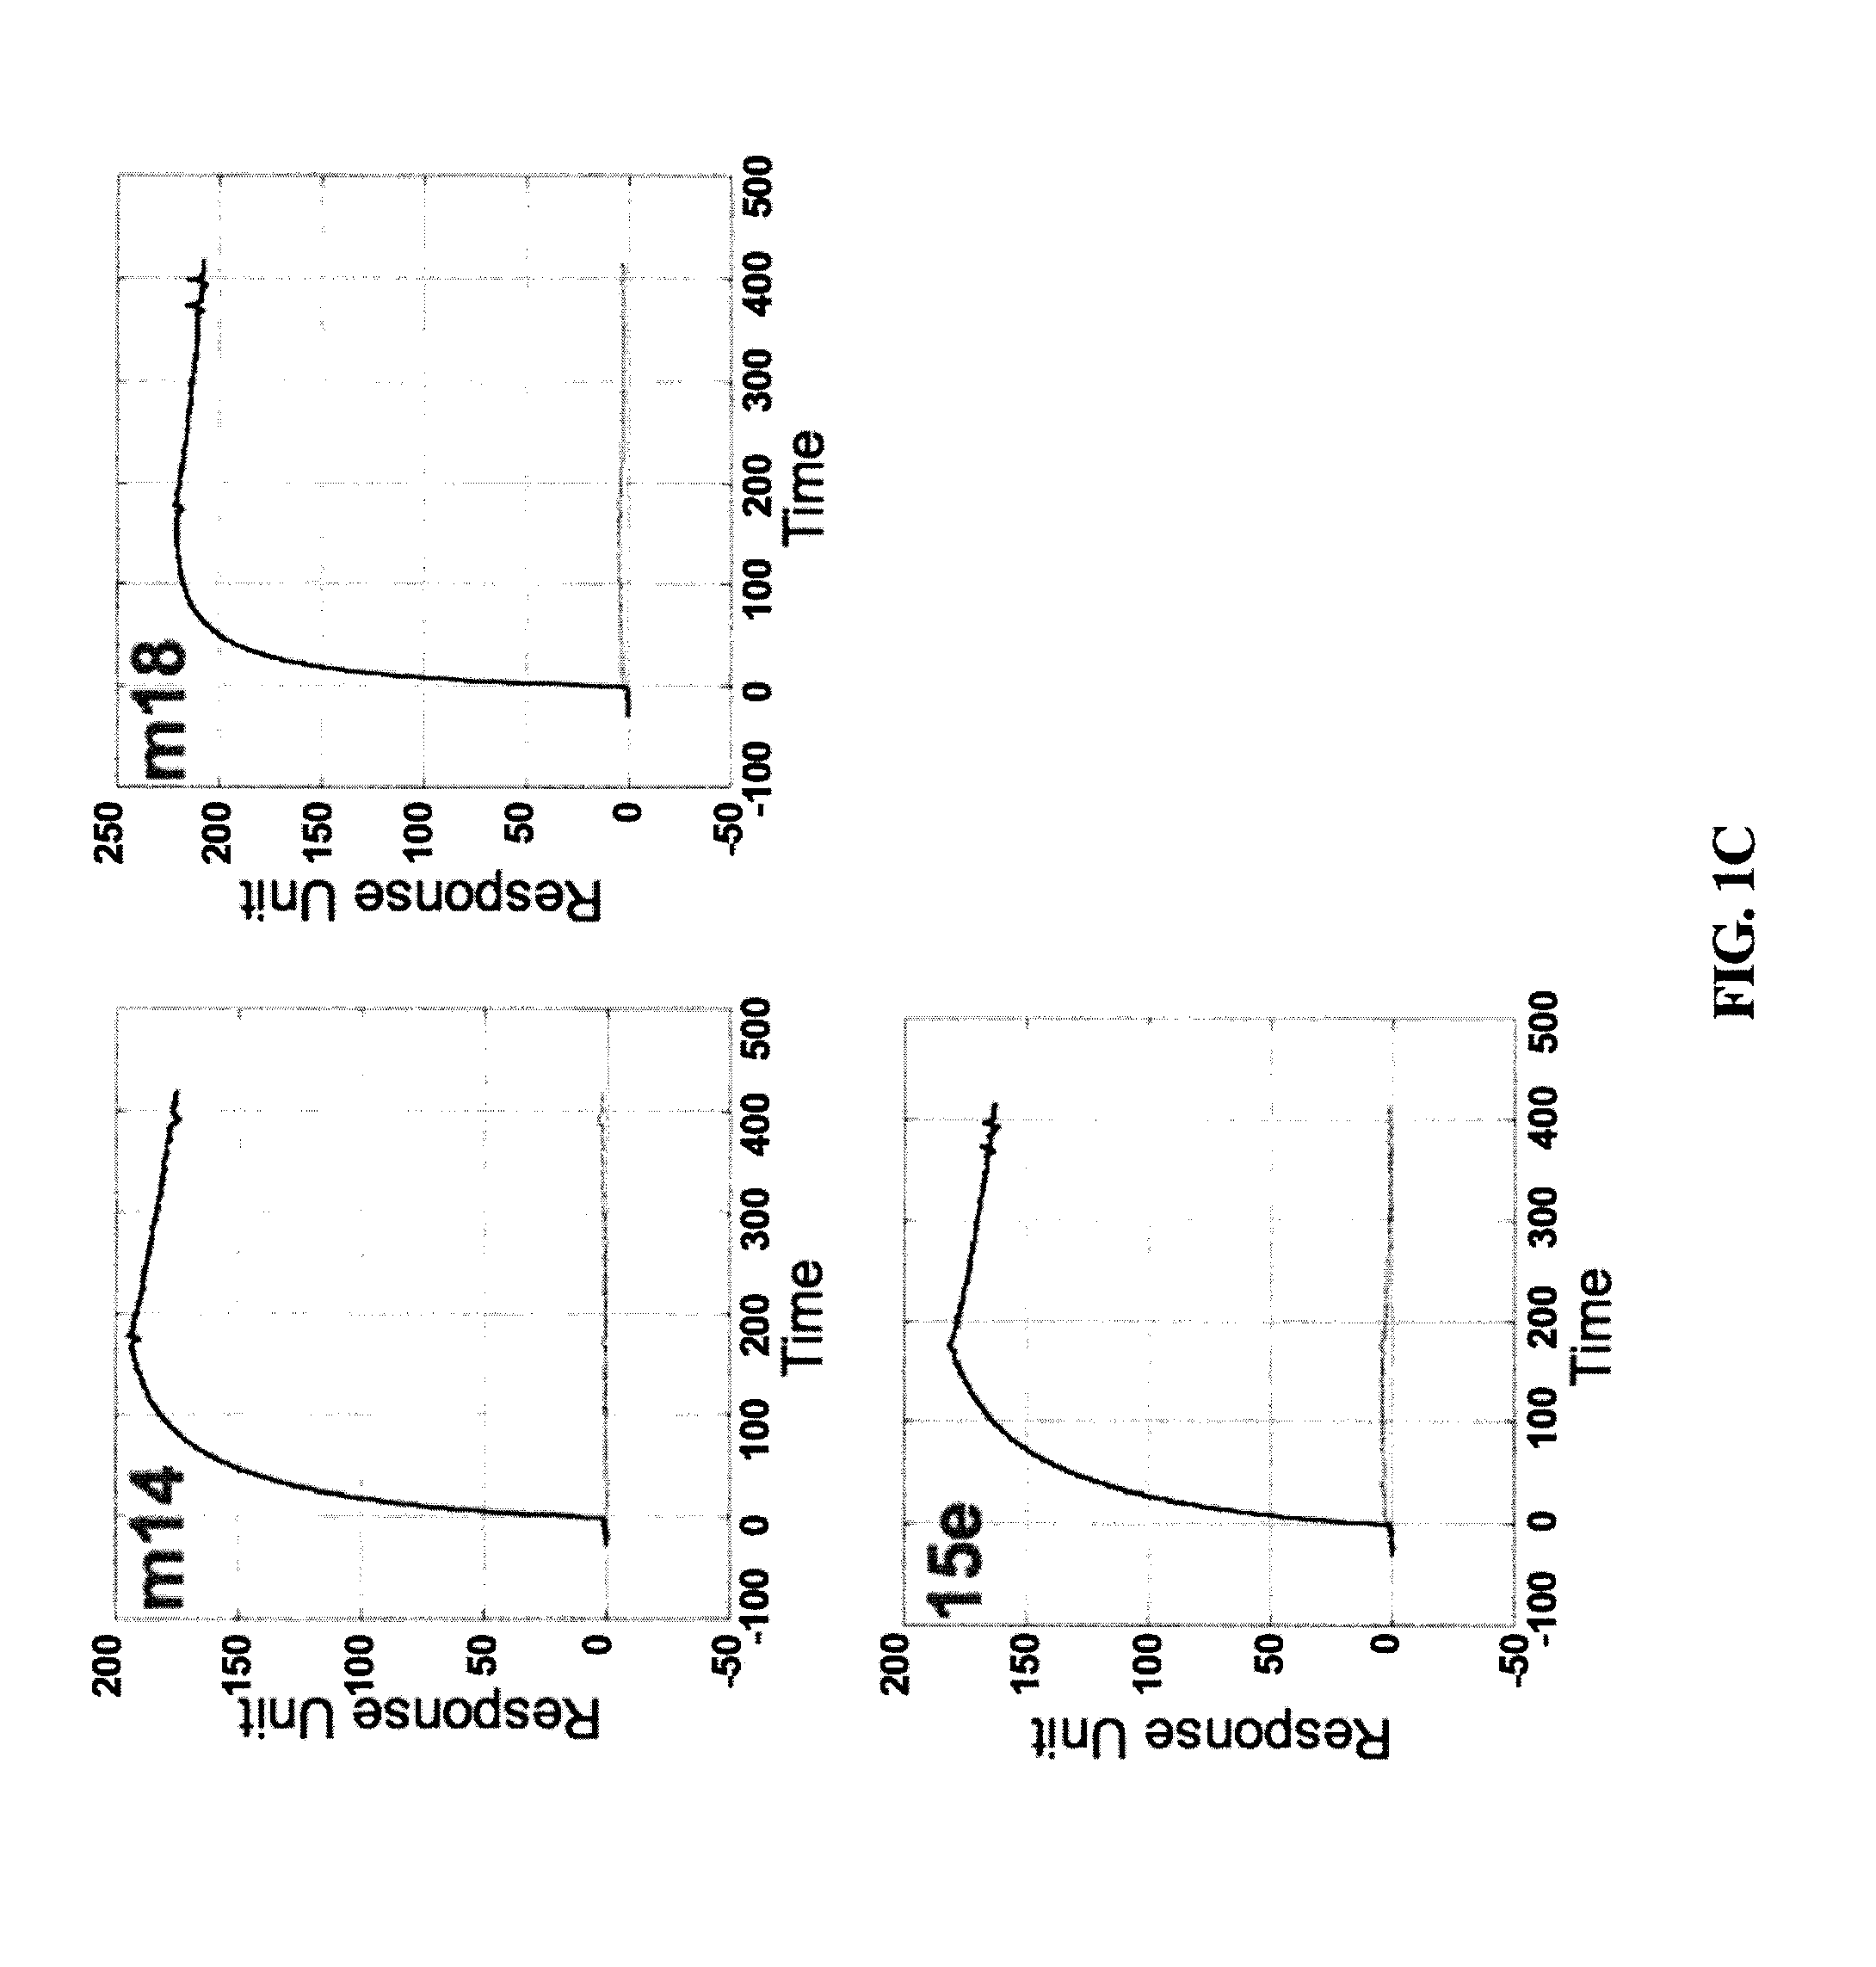 Engineered outer domain (EOD) of HIV gp120 and mutants thereof